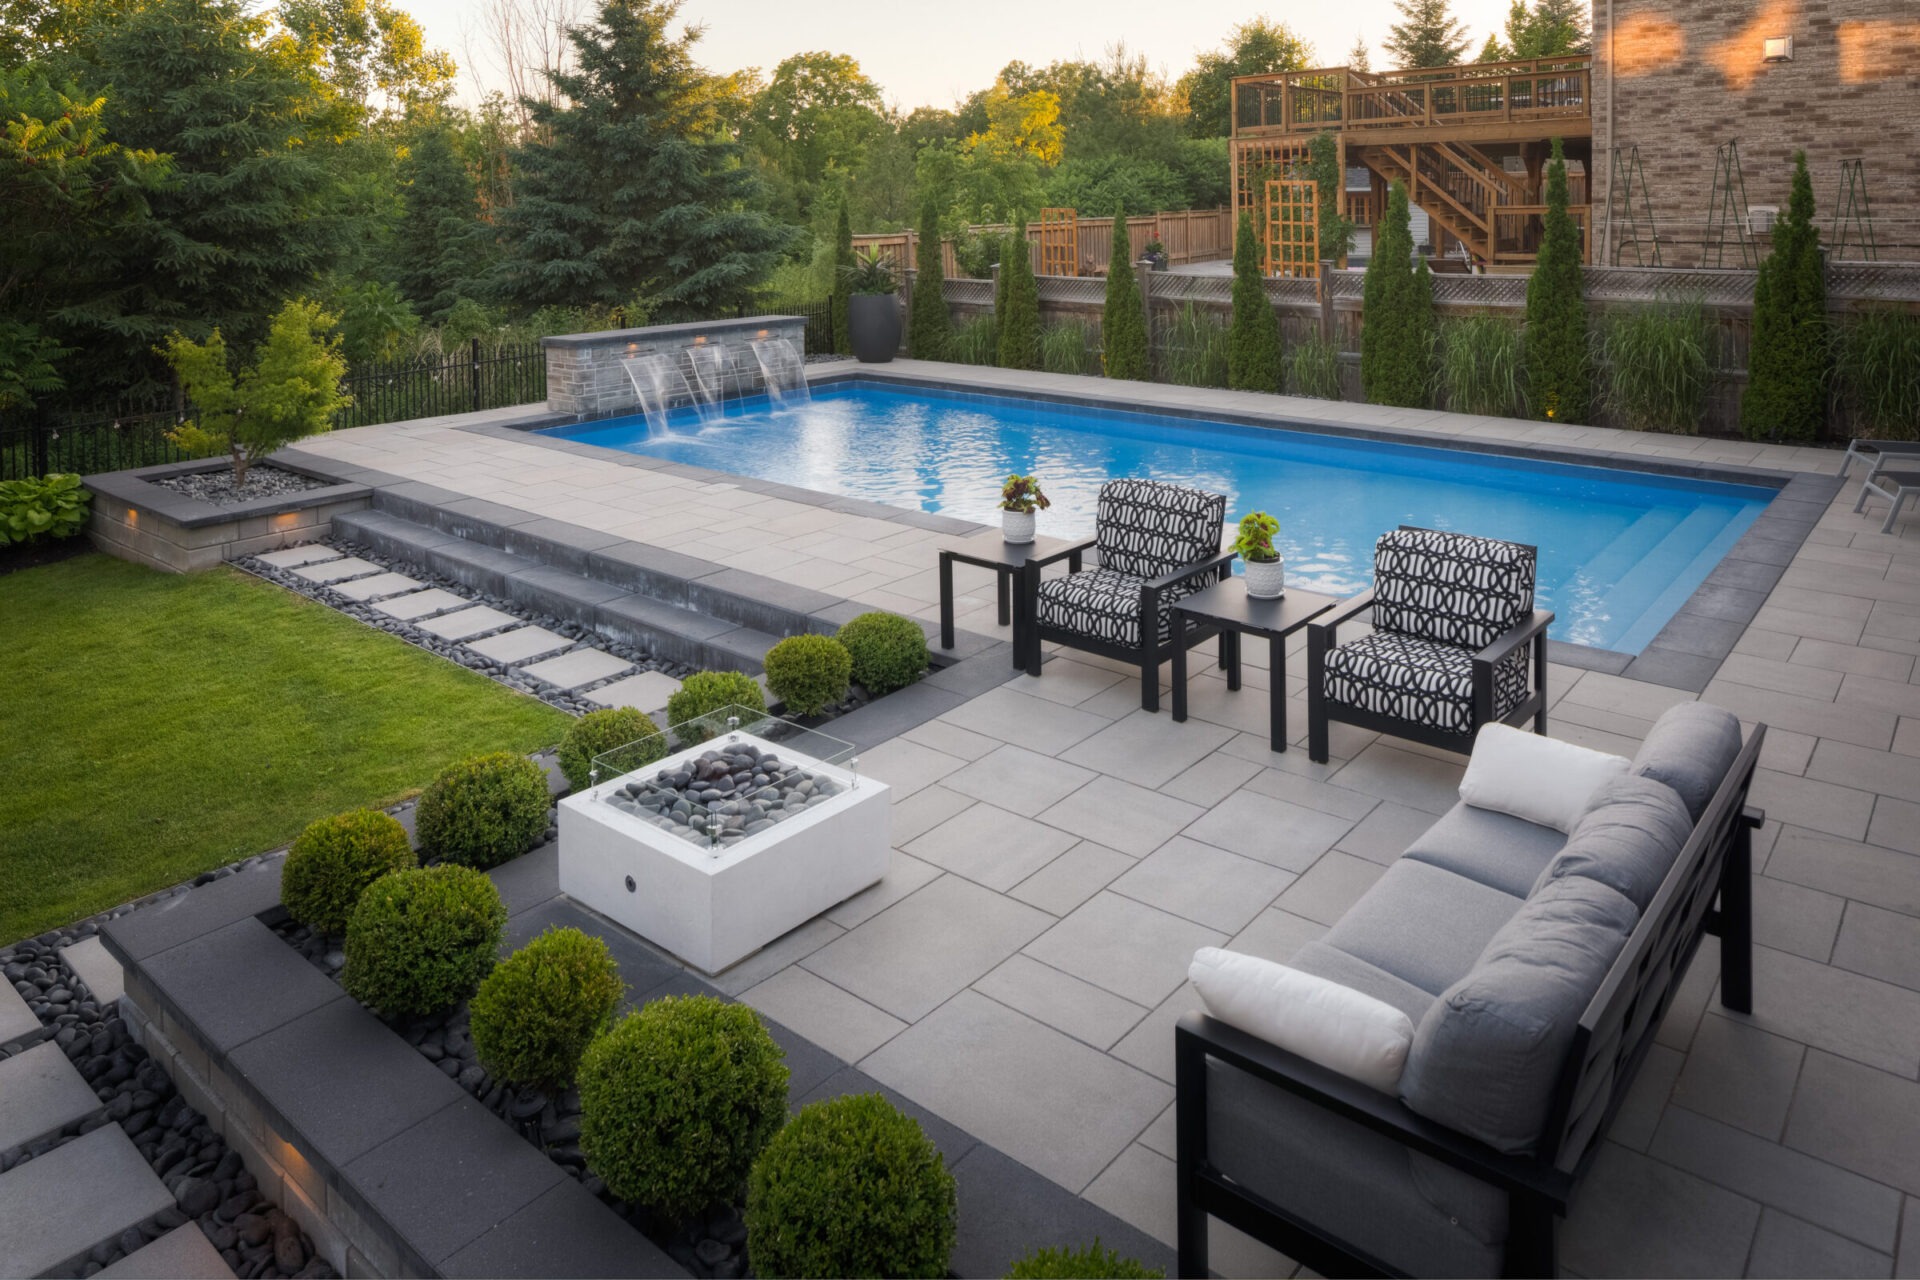 An elegant backyard with a large swimming pool, stylish patio furniture, a fire pit, meticulously landscaped greenery, and a wooden deck under twilight sky.